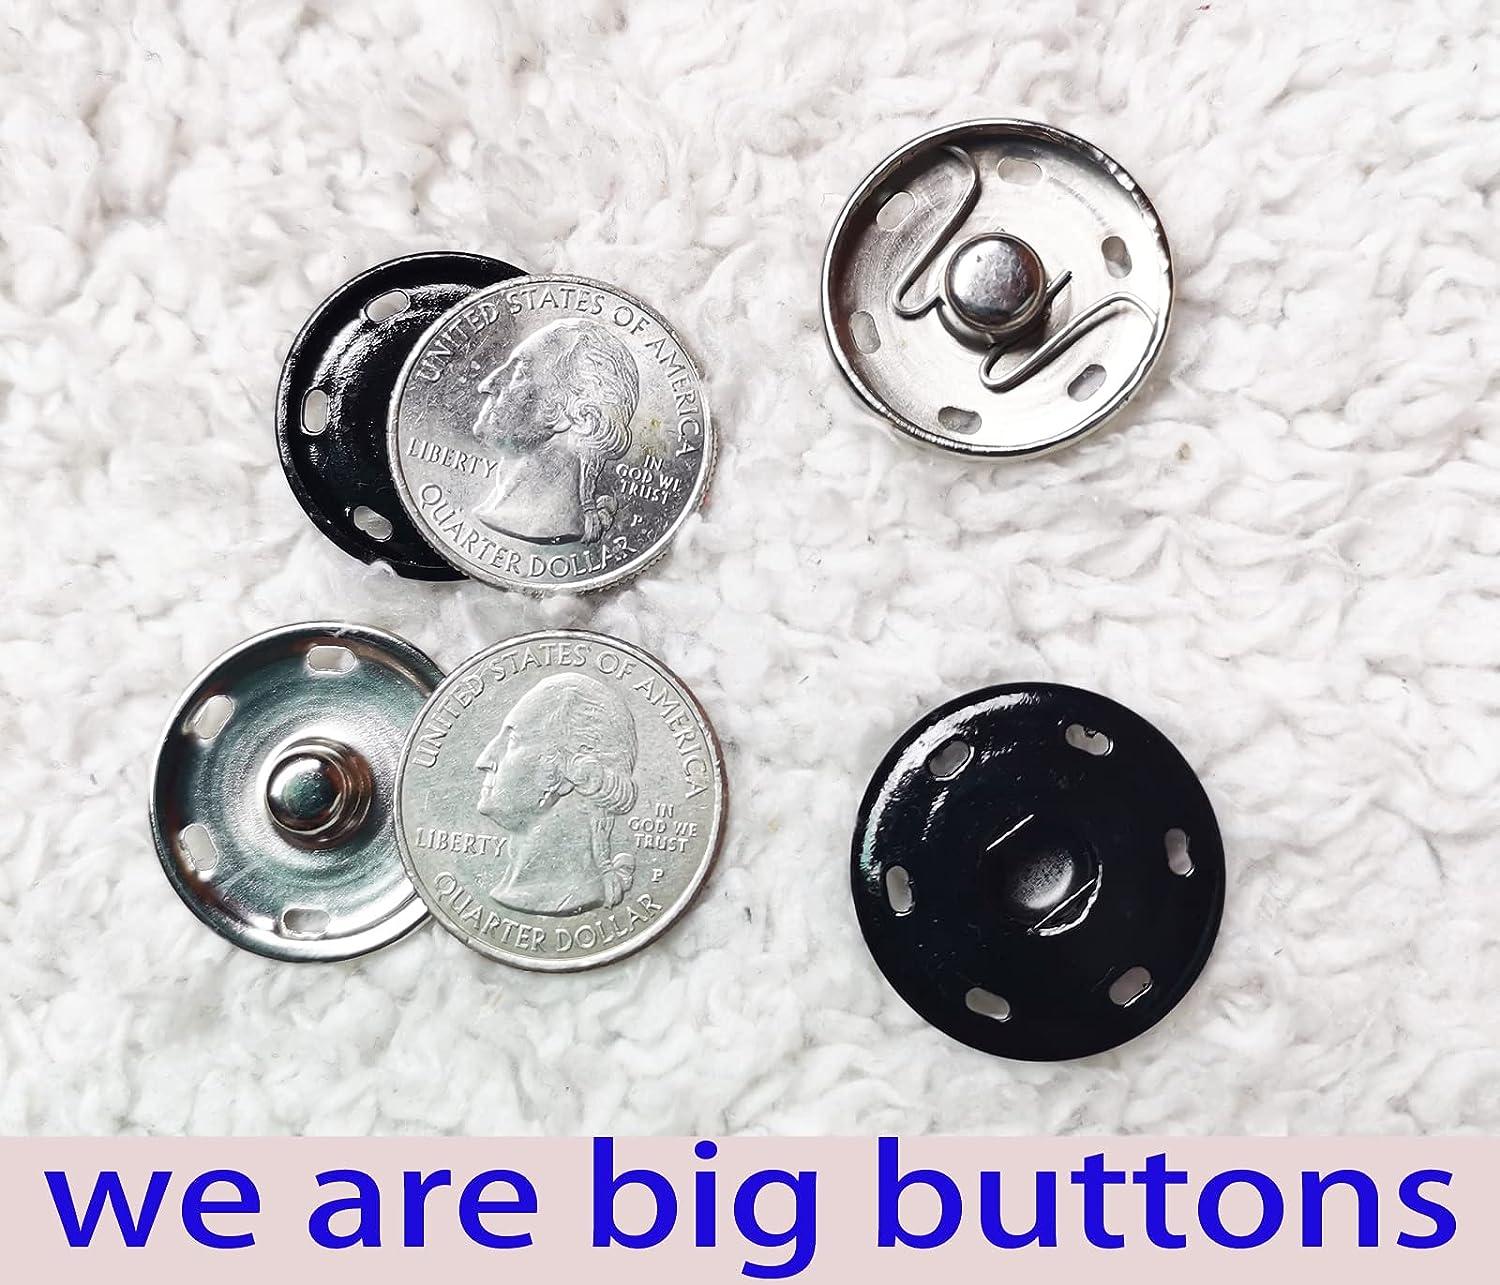 10 Sets Button Fasteners Clothing Snaps Metal Buttons Jacket